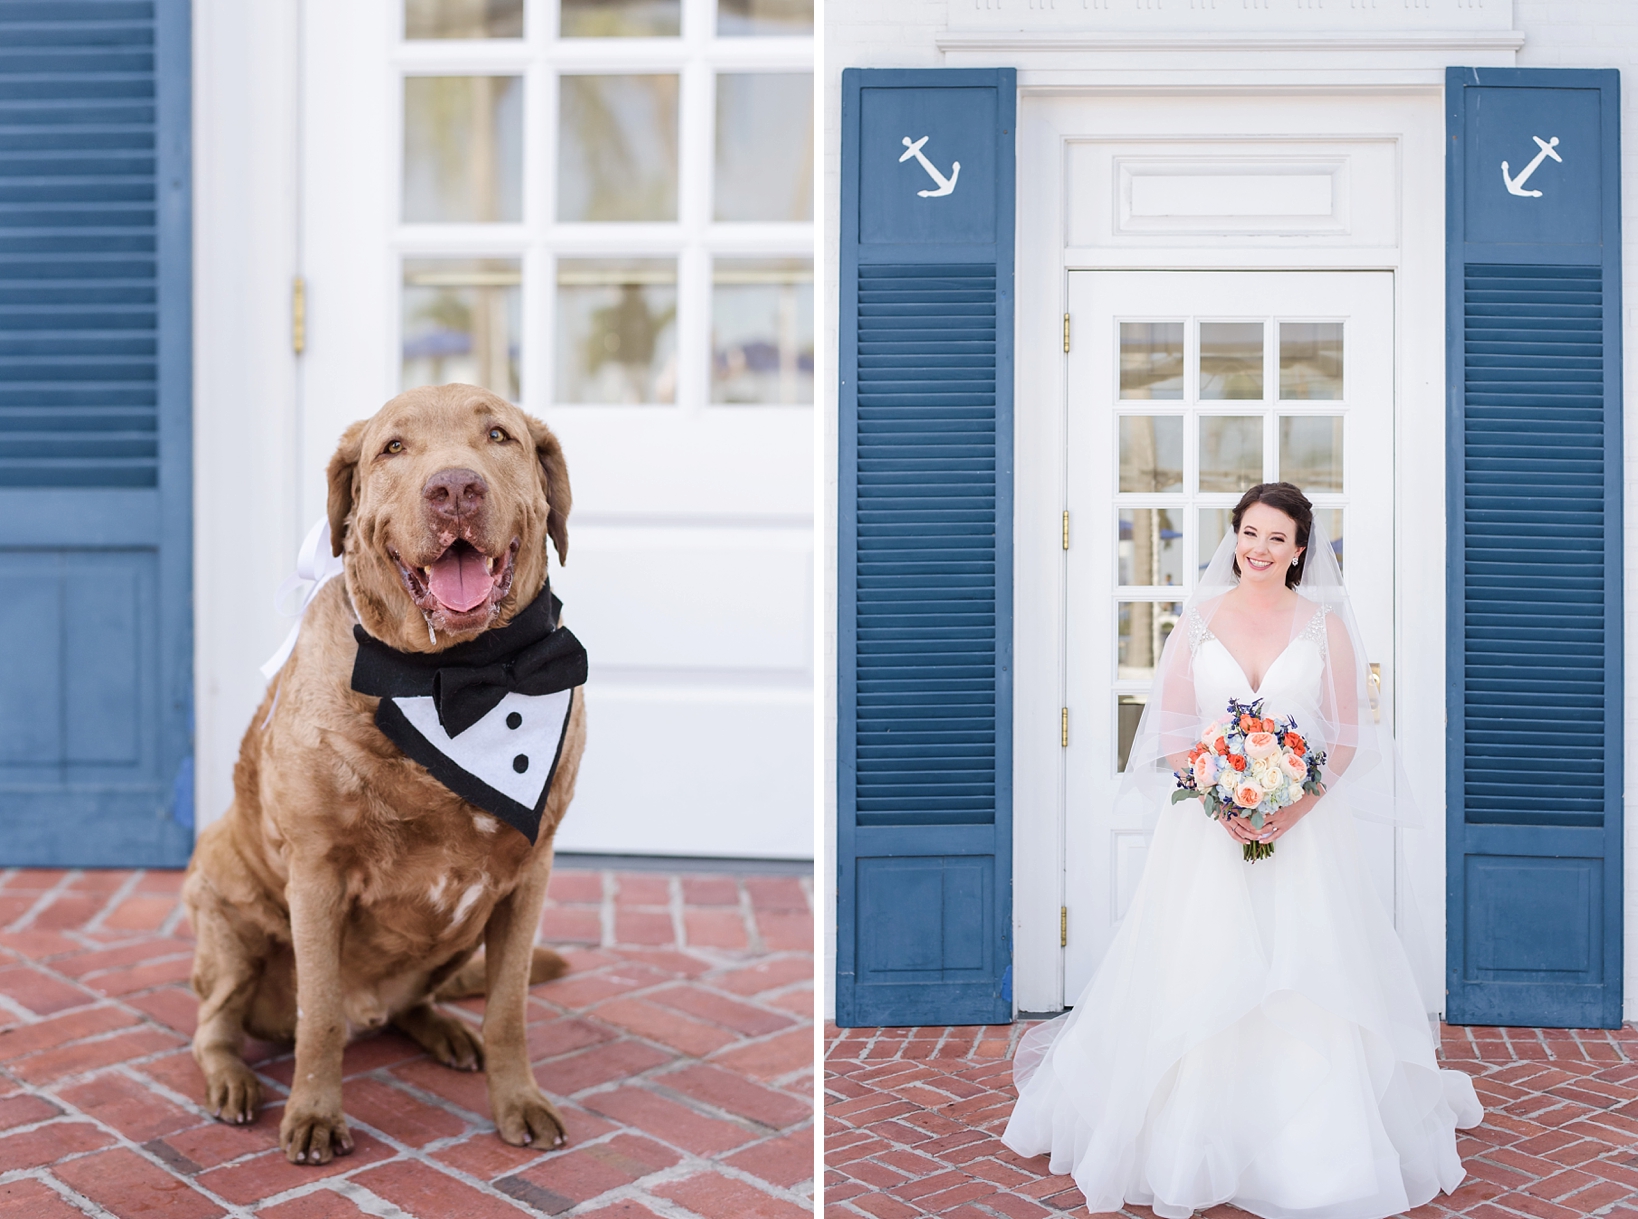 Bride and her dog wearing a tuxedo bandana pose for their photo in front of the doors of the Yacht Club